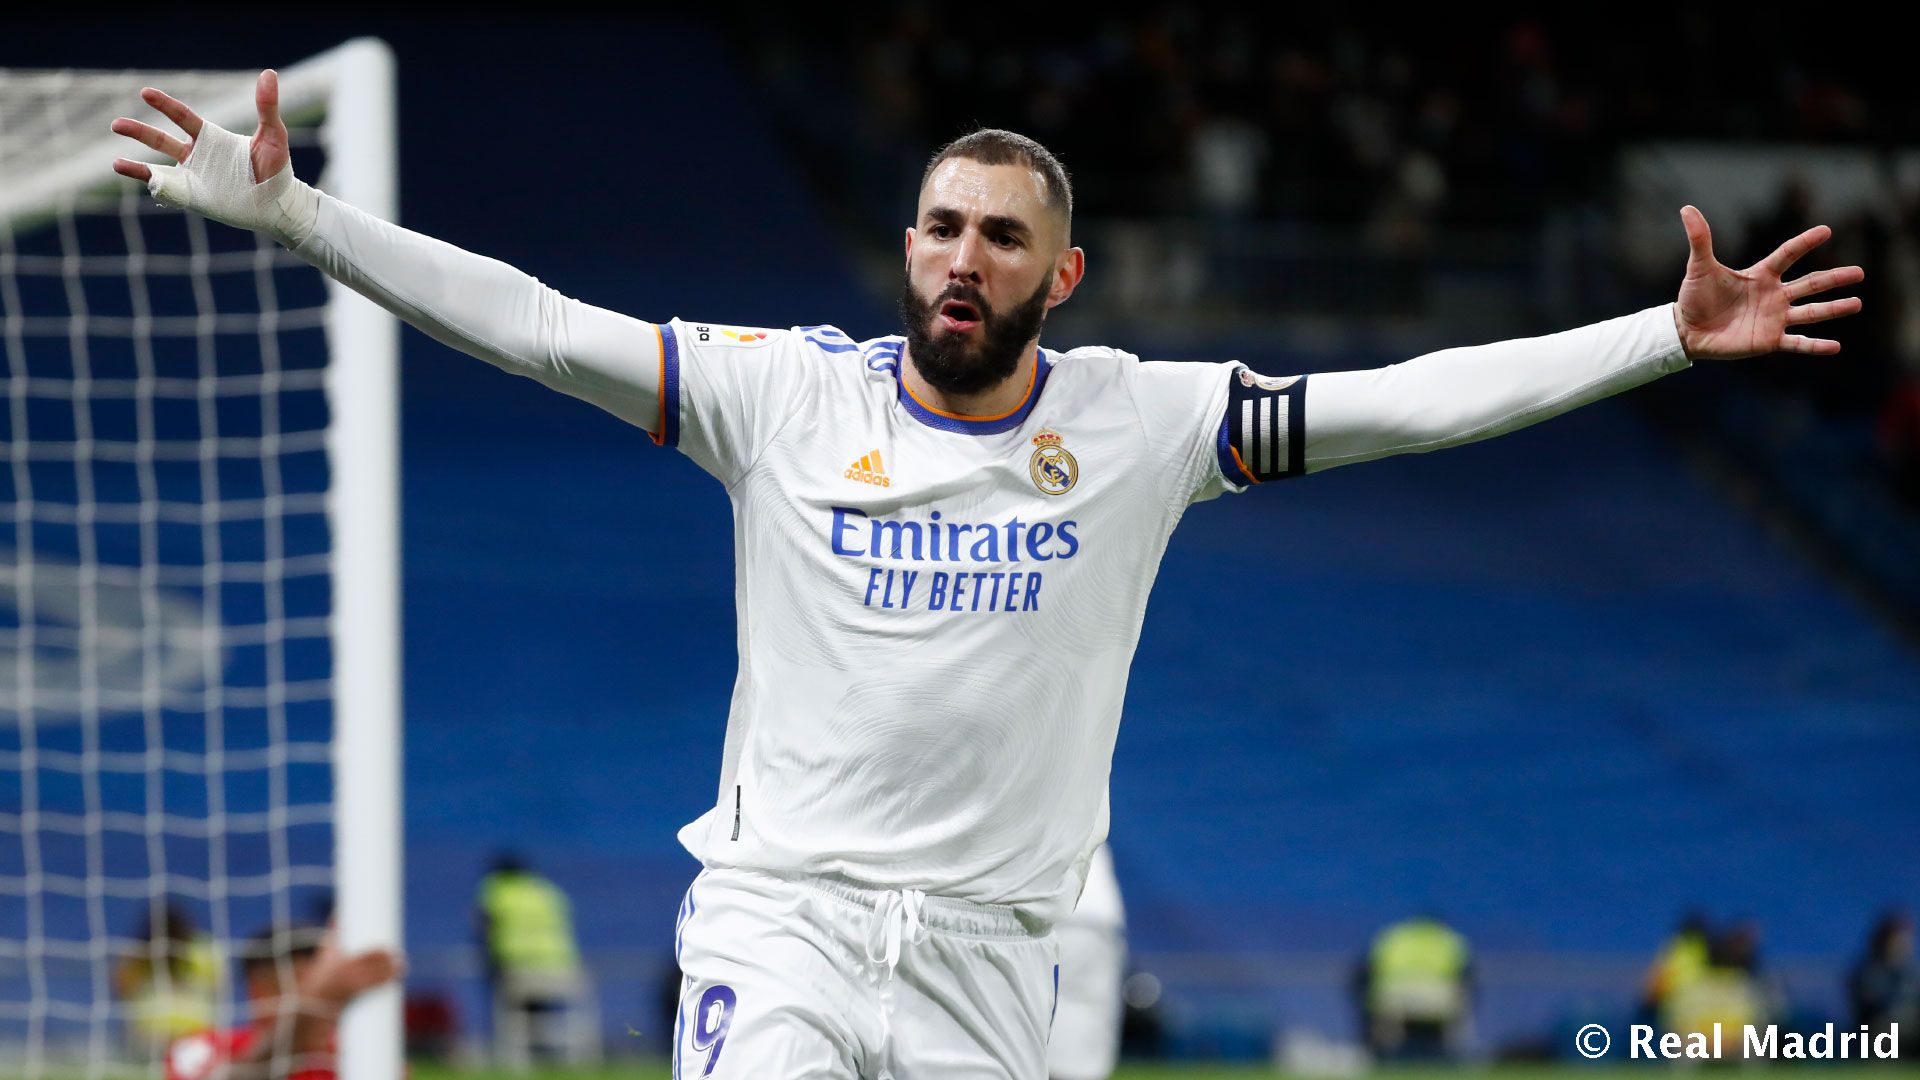 Benzema has made the eighth most appearances for Real Madrid. Real Madrid CF